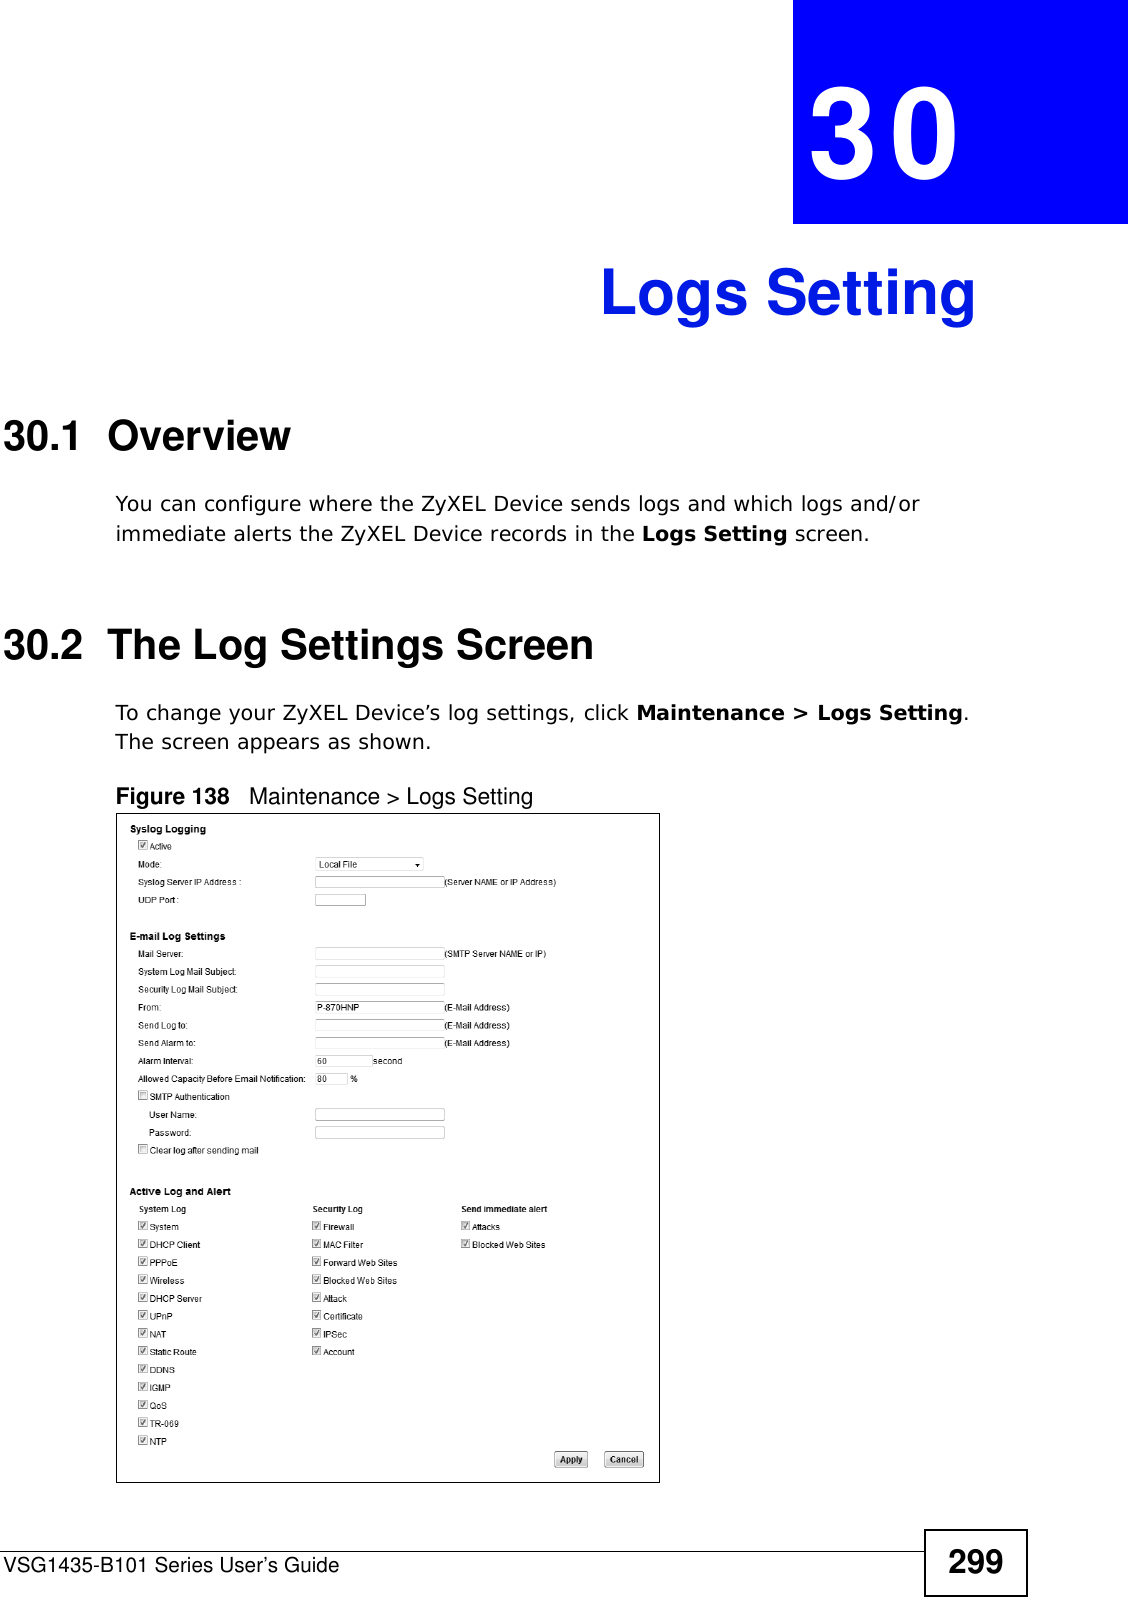 VSG1435-B101 Series User’s Guide 299CHAPTER  30 Logs Setting30.1  Overview You can configure where the ZyXEL Device sends logs and which logs and/or immediate alerts the ZyXEL Device records in the Logs Setting screen.30.2  The Log Settings ScreenTo change your ZyXEL Device’s log settings, click Maintenance &gt; Logs Setting. The screen appears as shown.Figure 138   Maintenance &gt; Logs Setting